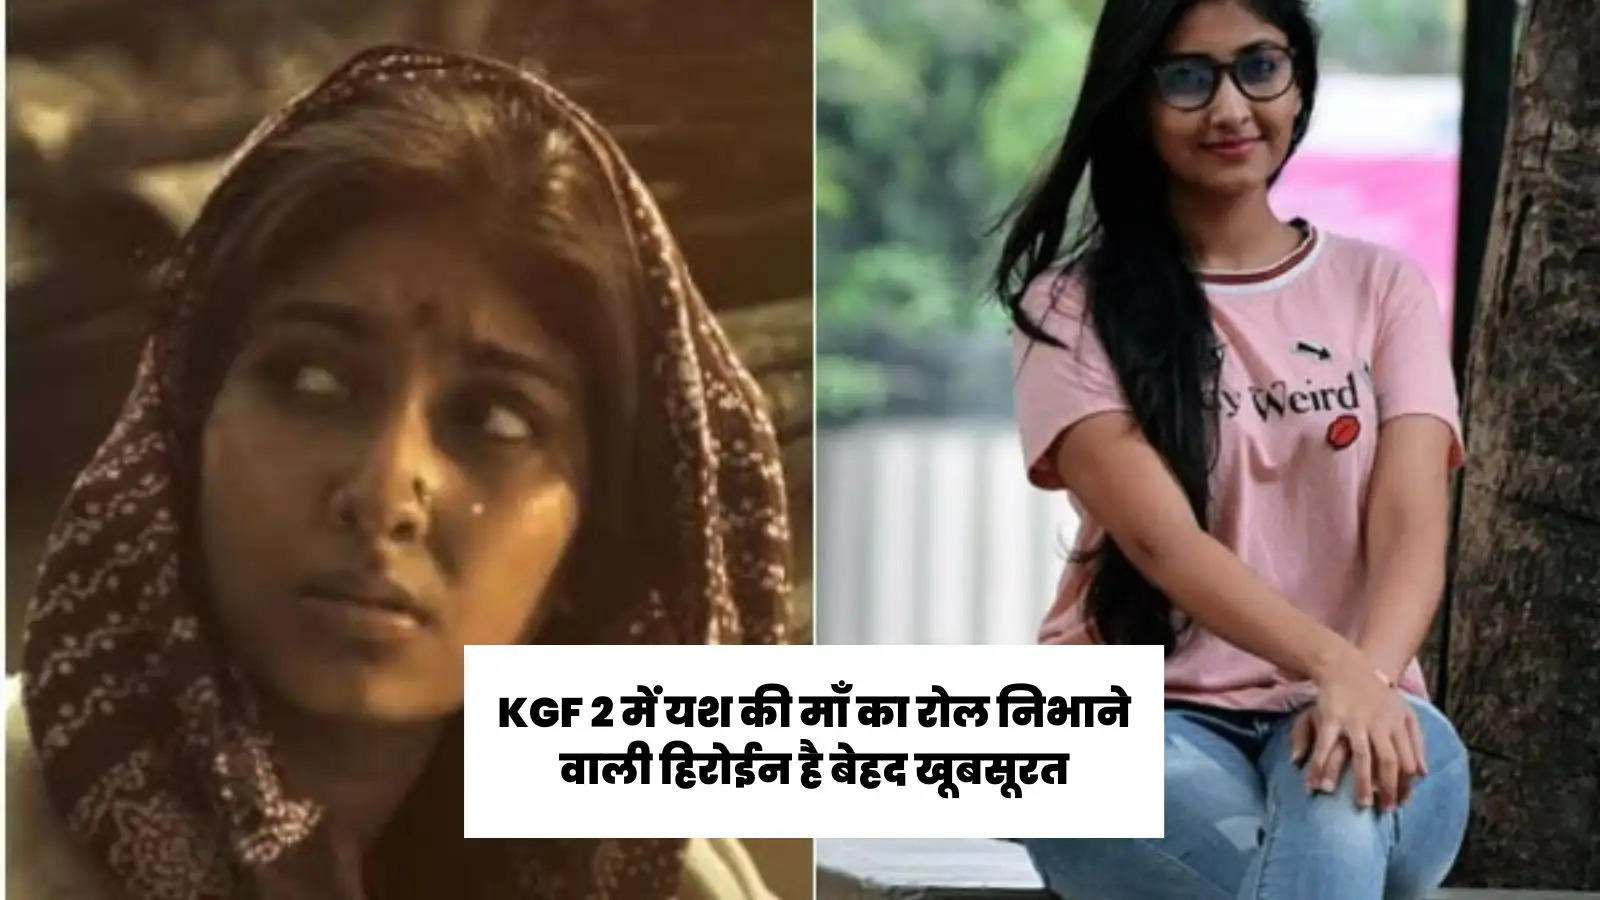 yashs-mother-looks-like-this-in-real-life-in-kgf-2